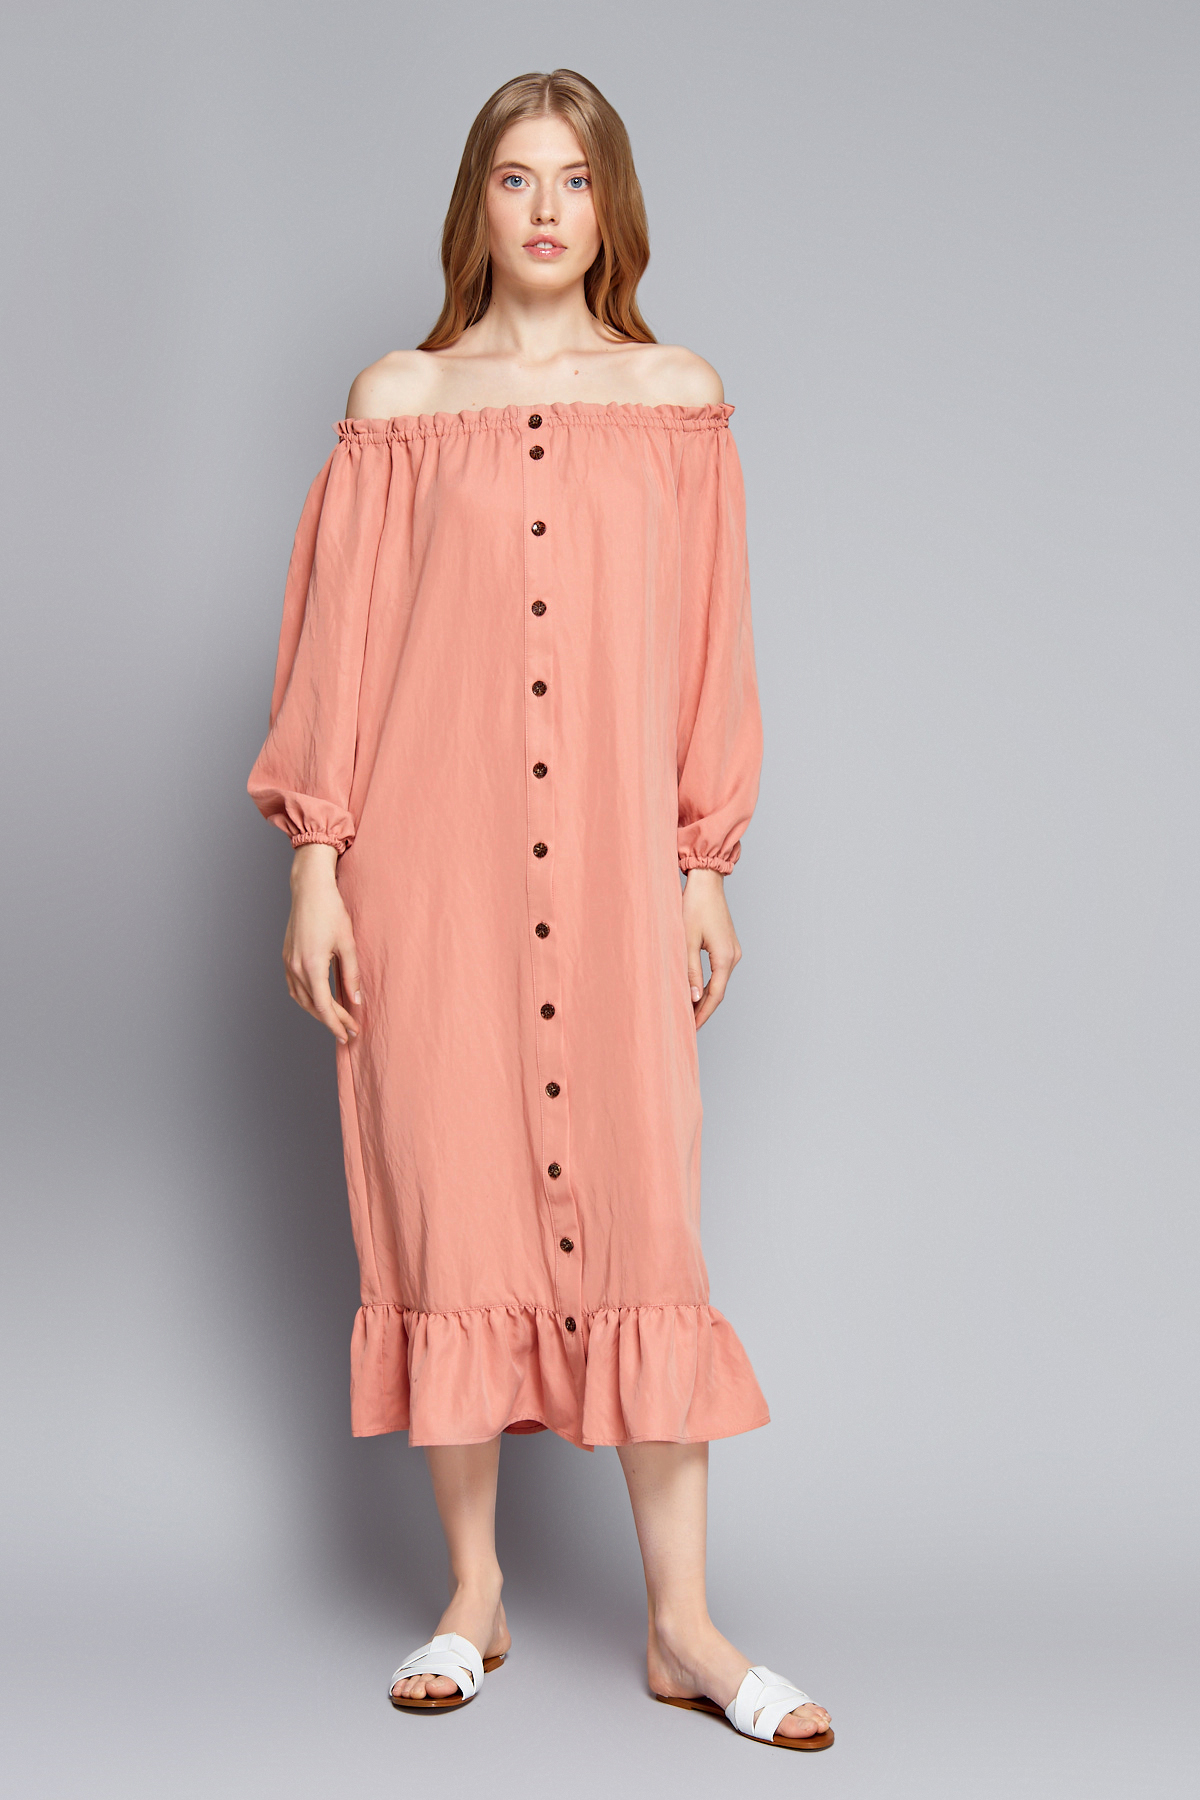 Powder pink midi dress with buttons elastic neckline and ruffles, photo 1